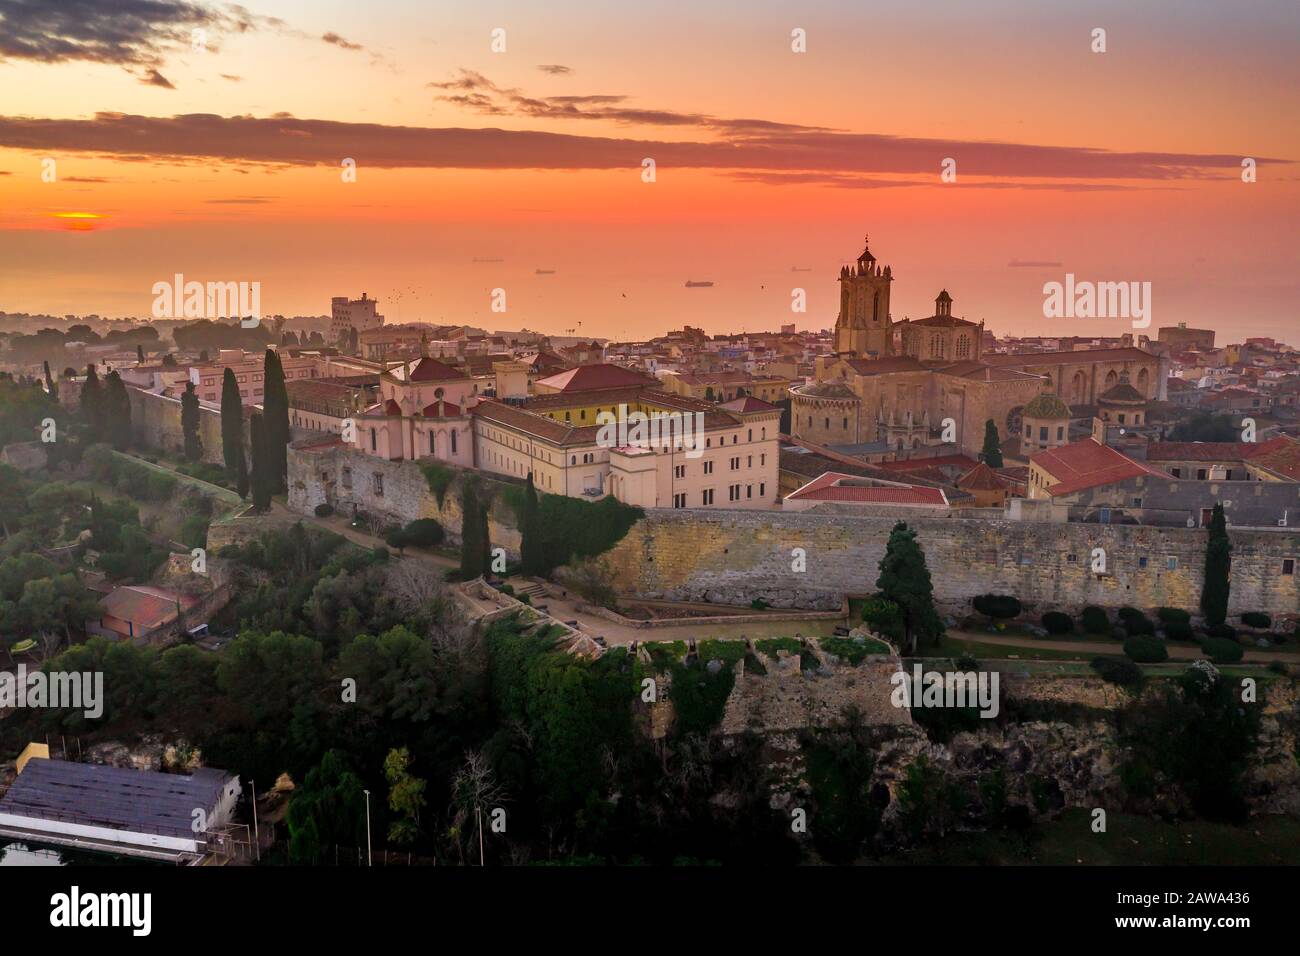 Aerial view of Tarragona Spain during sunrise with view of the Gothic cathedral city walls, bastions, Roman walls and other historic buildings Stock Photo